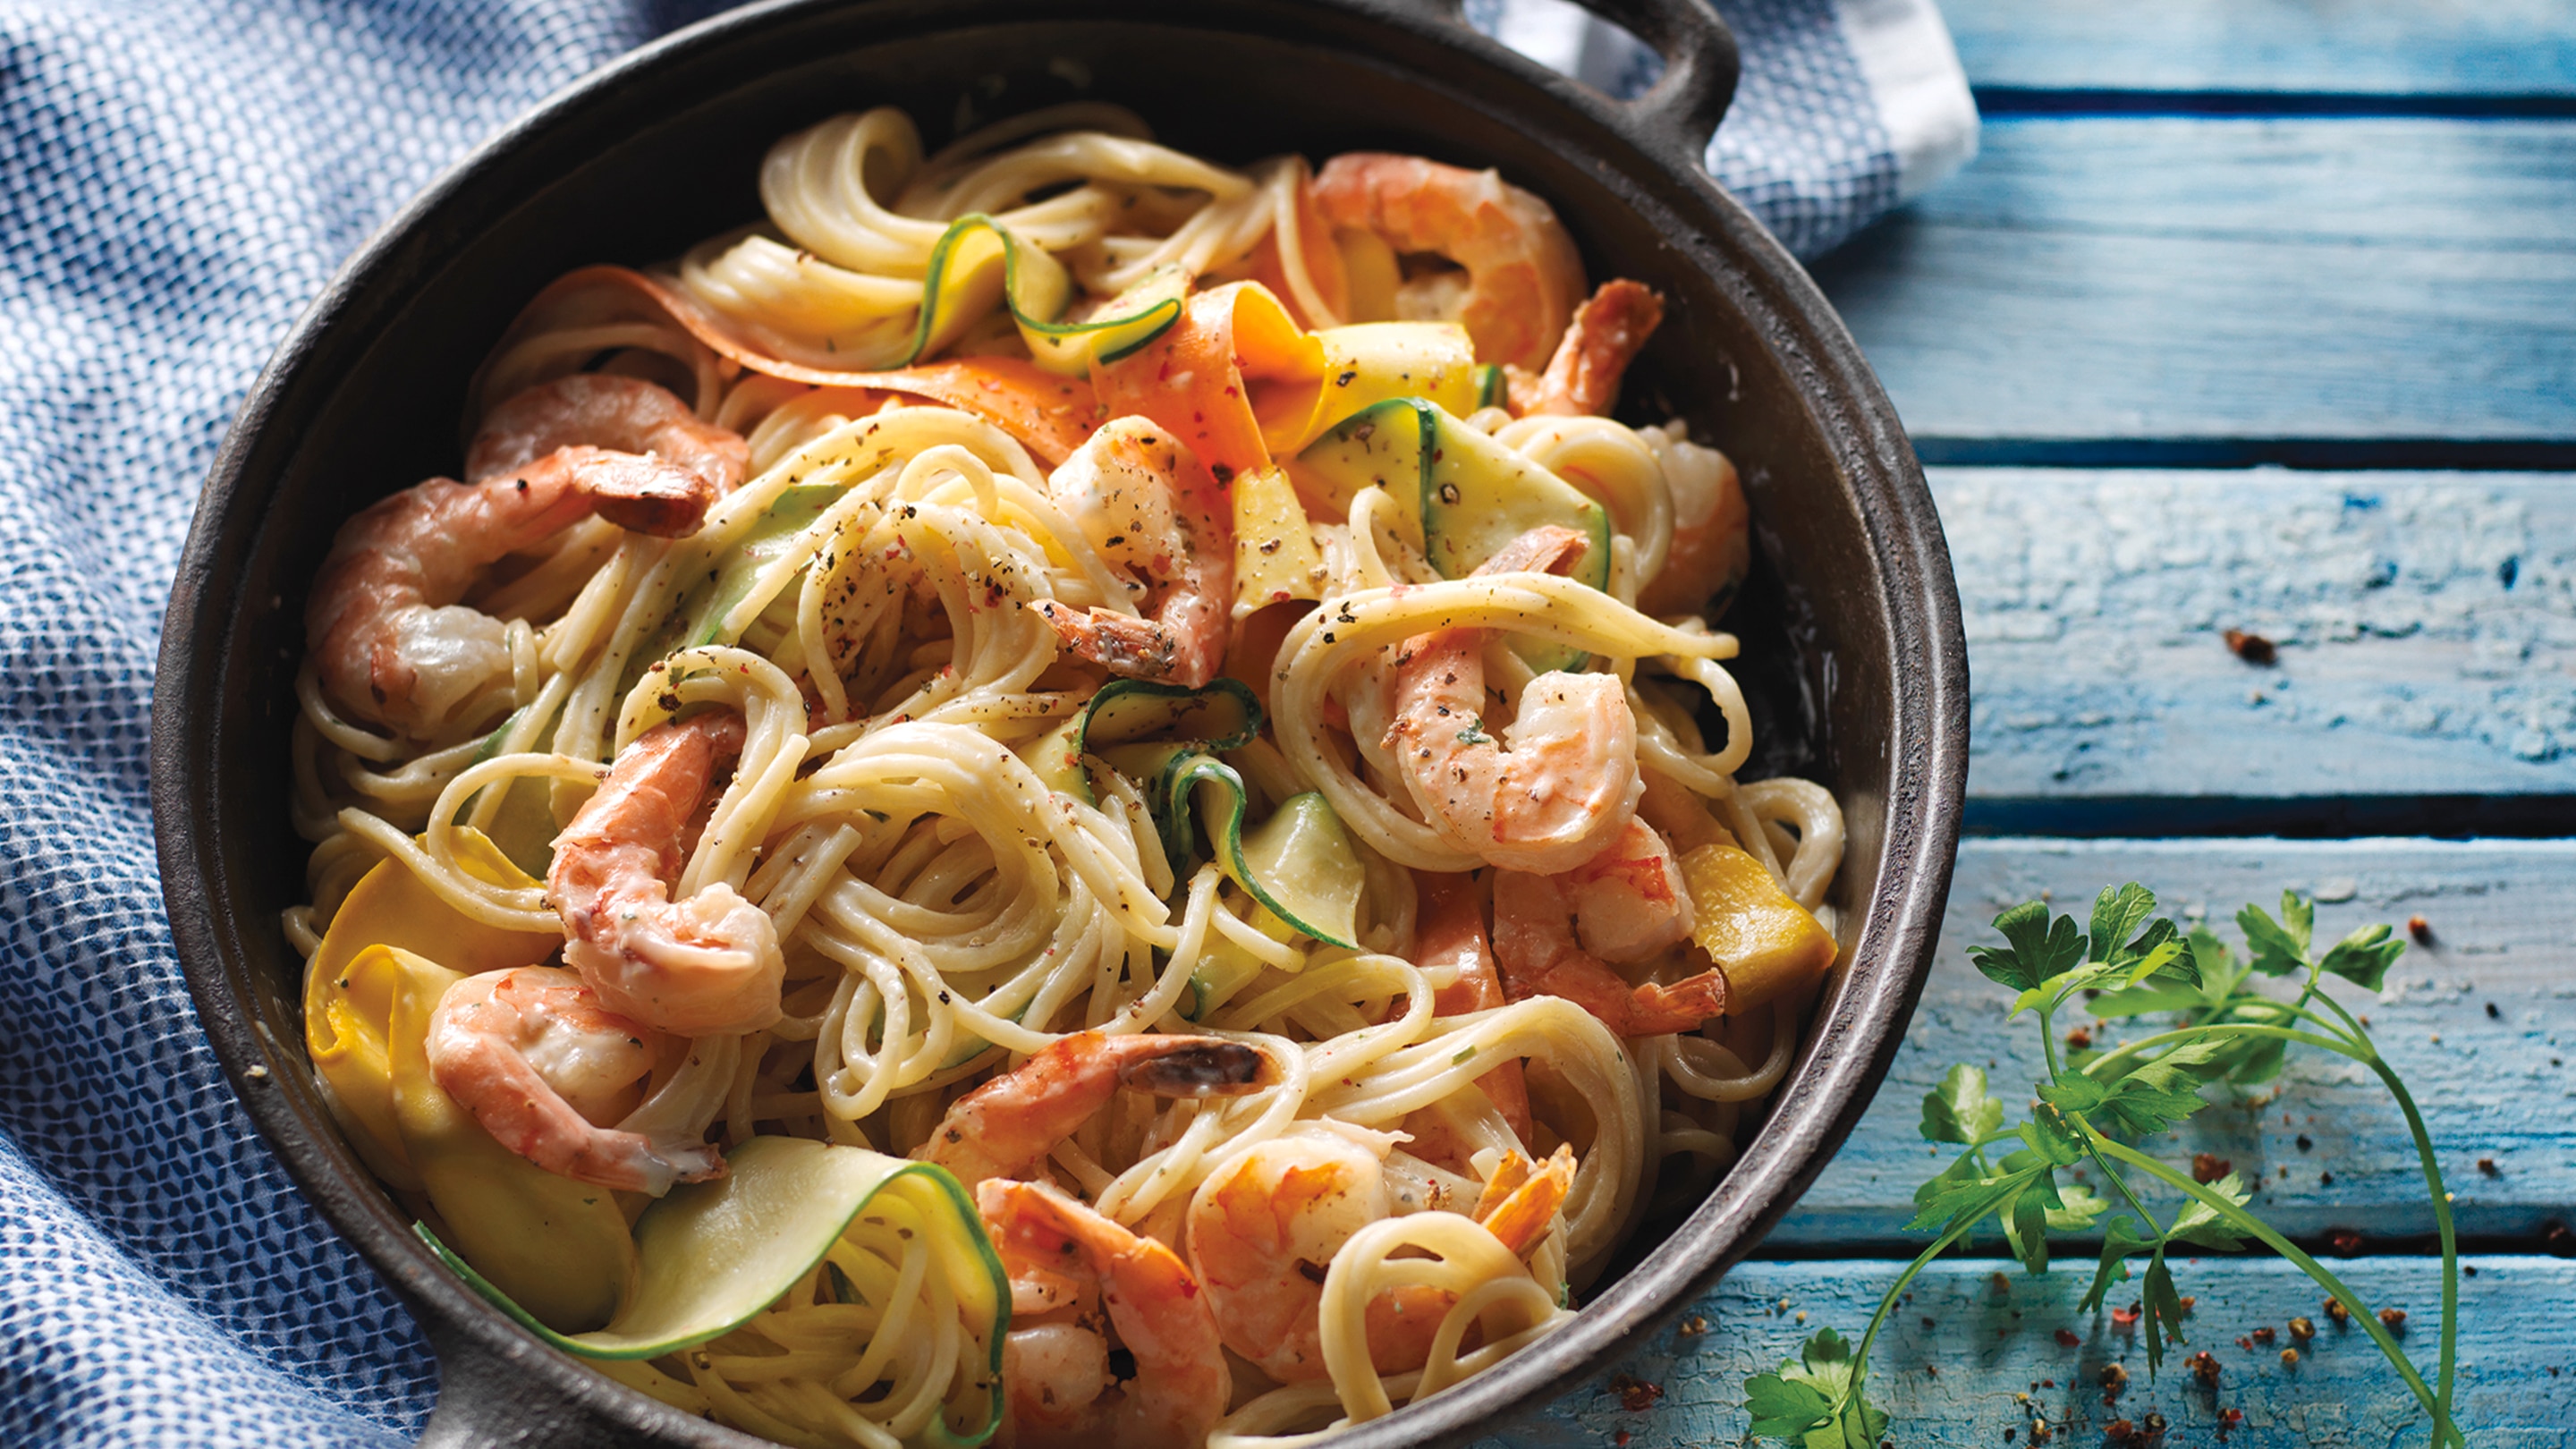 Pasta with shrimp & vegetable ribbons